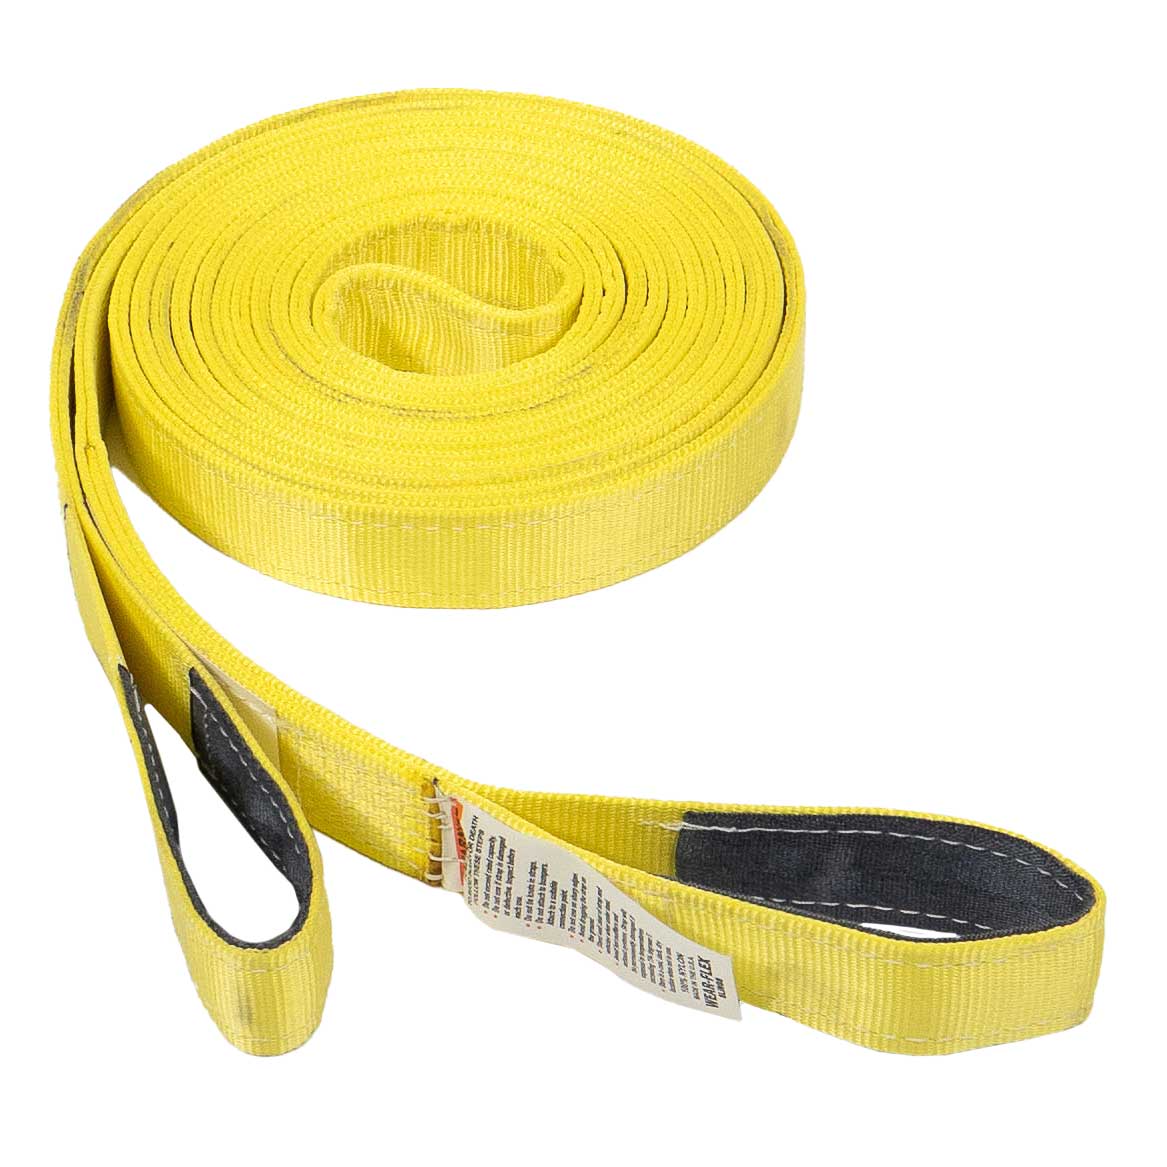 2 x 20' 1-Ply Recovery Tow Strap